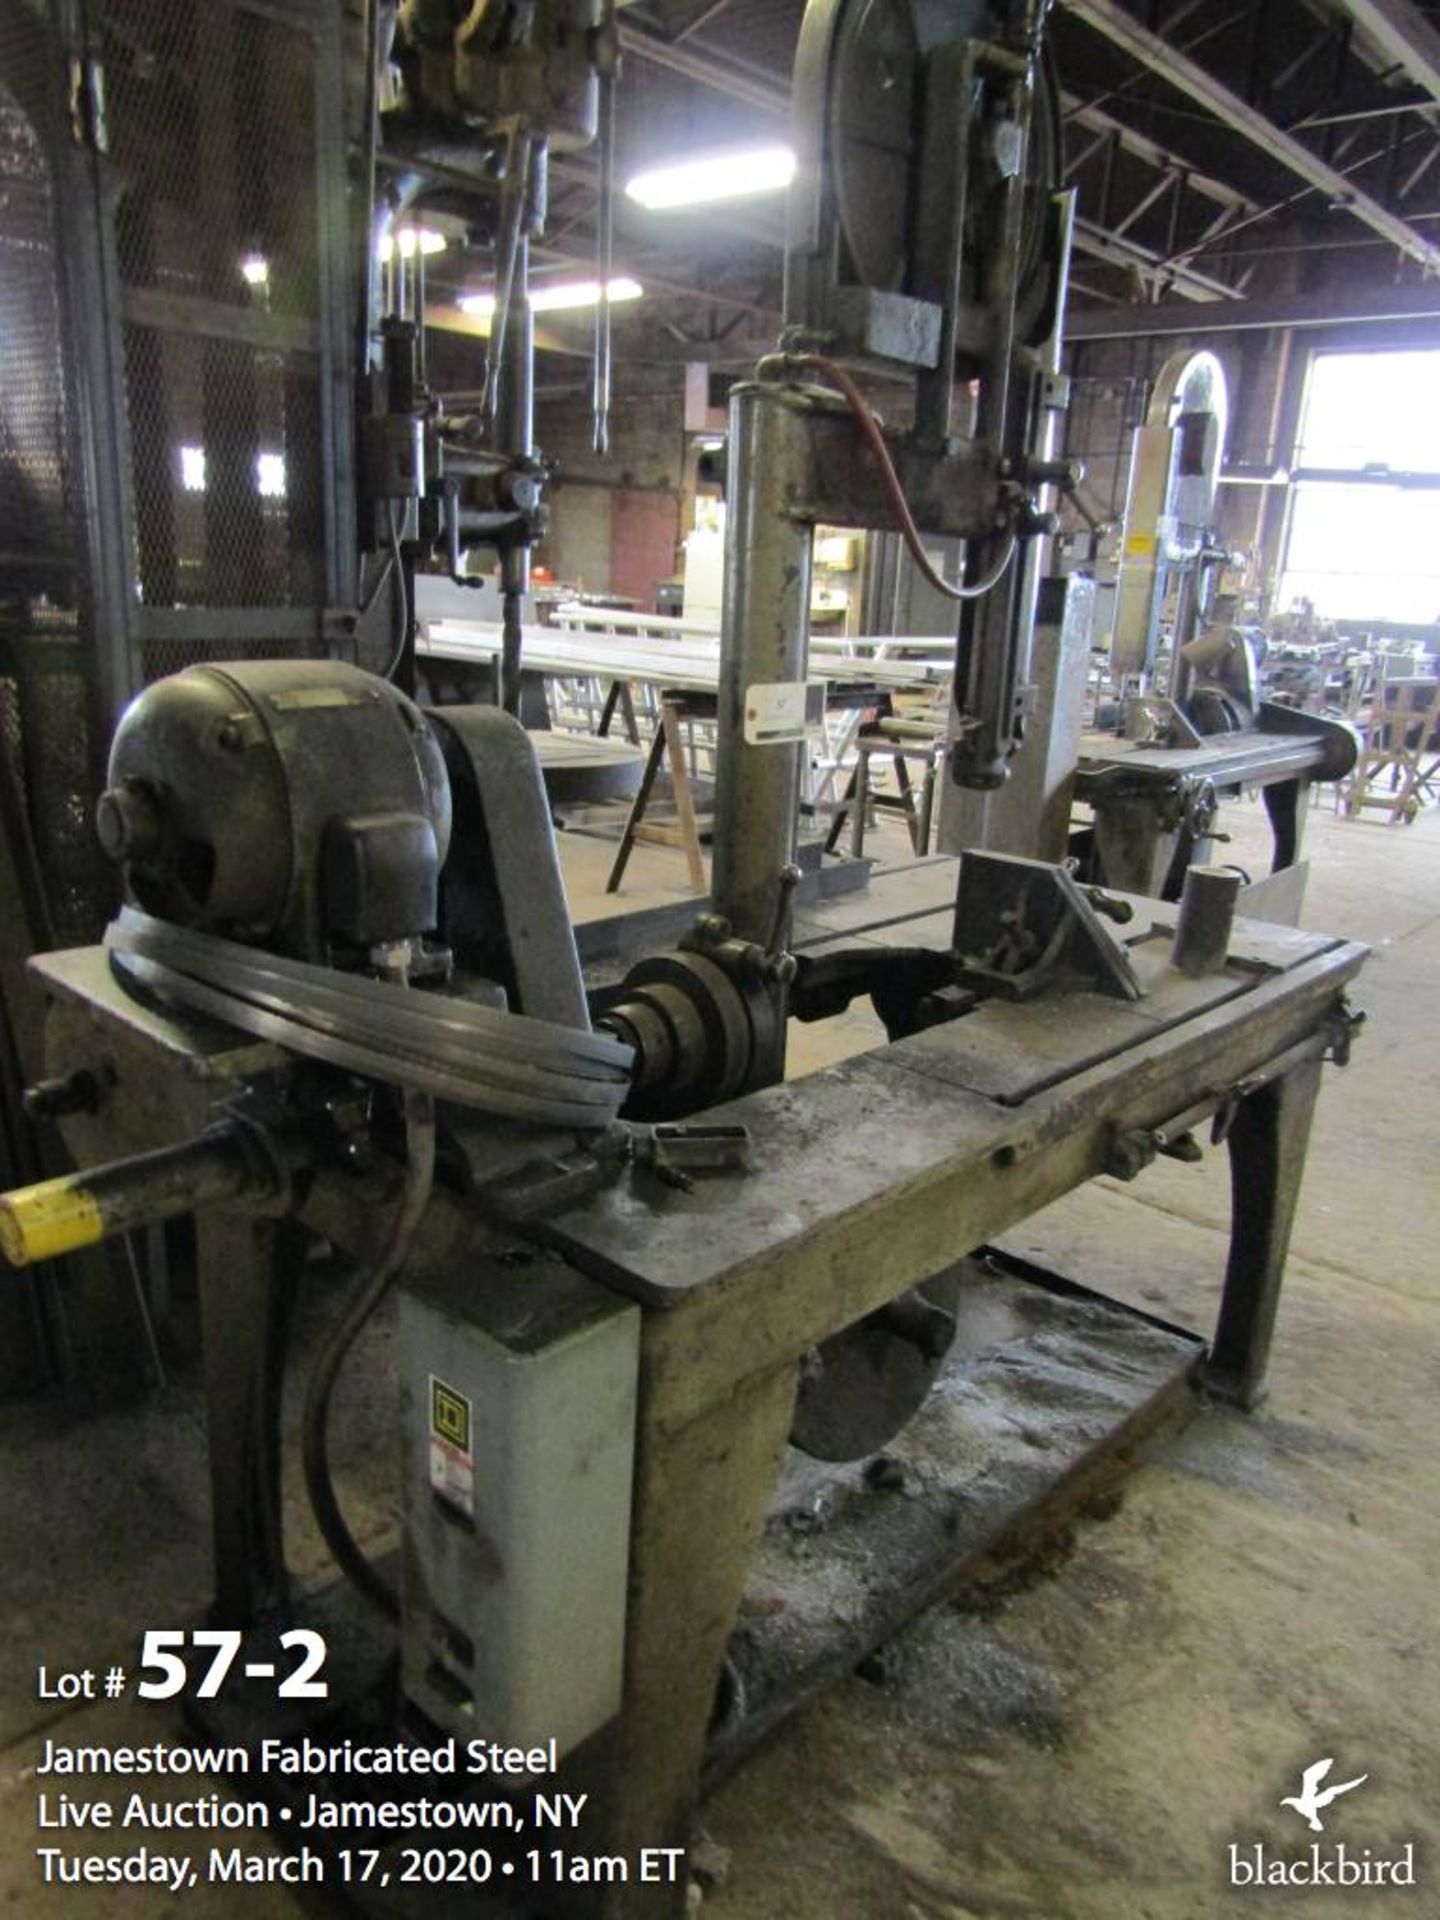 Marvel belt driven band saw 6 speed approx. 20" cut, 1hp. 3ph. - Image 3 of 5